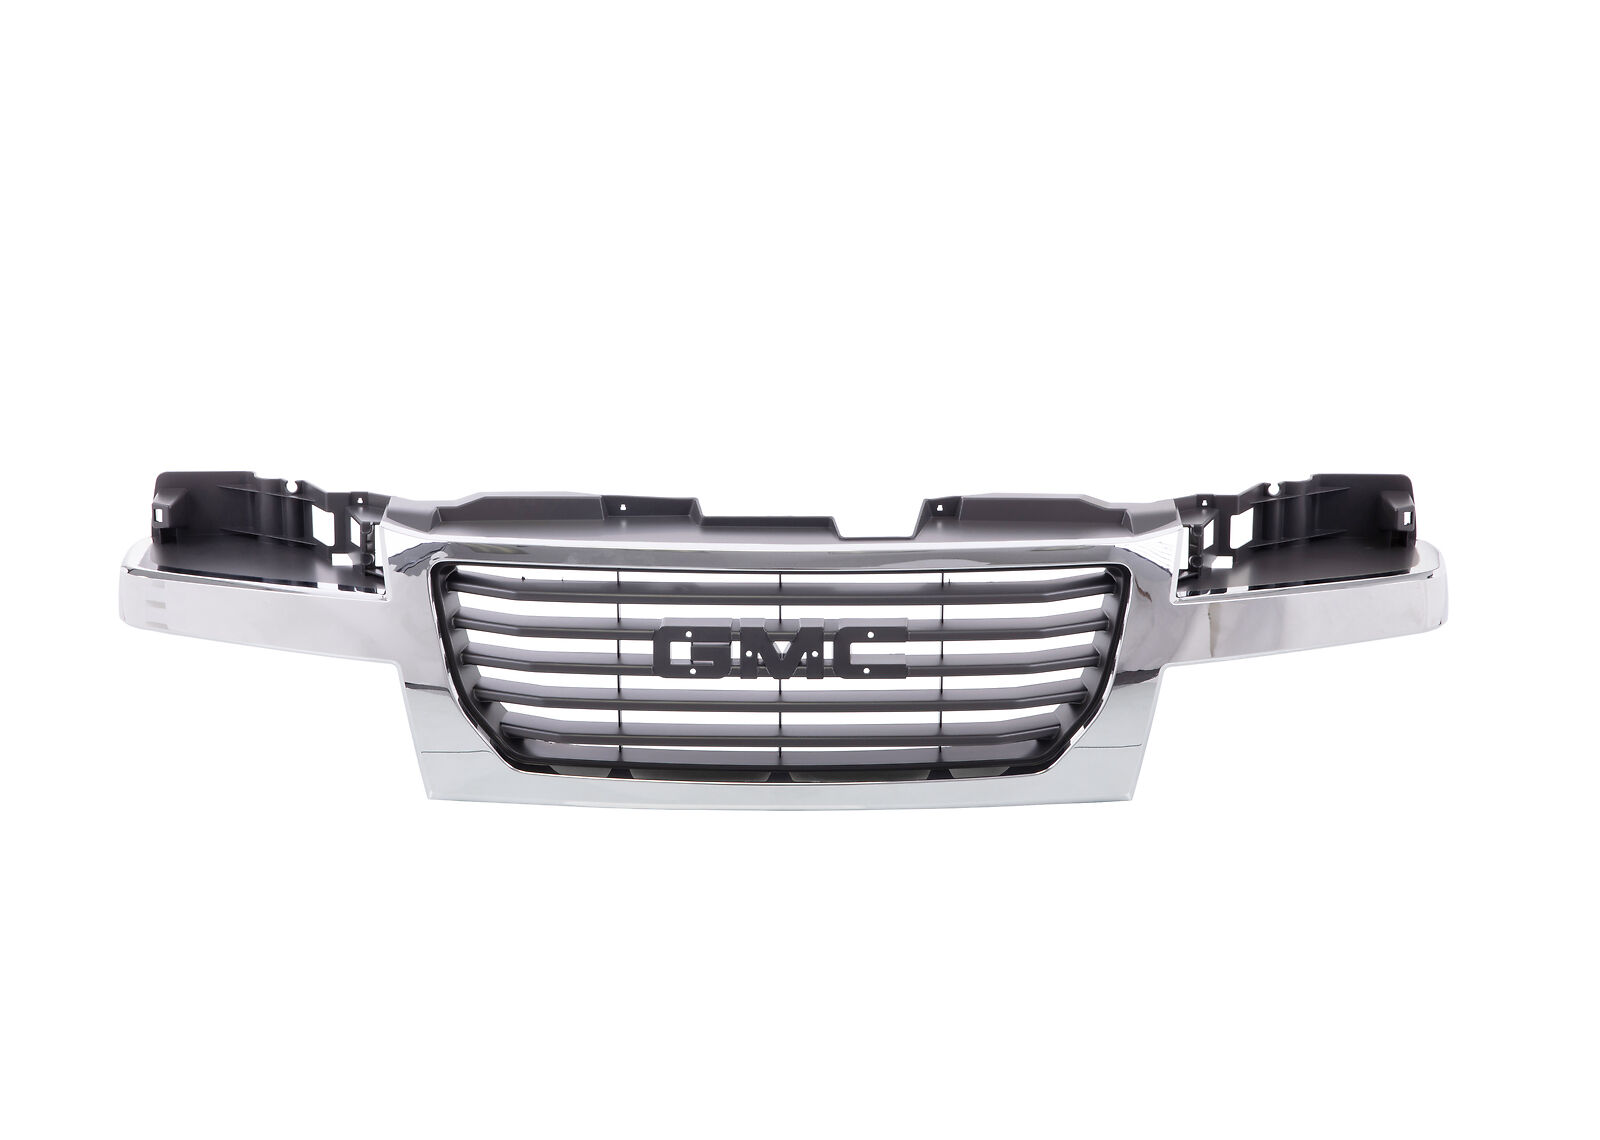 Chrome Gray Grille One Piece Design For 04-12 GMC Canyon Pickup Truck GM1200530